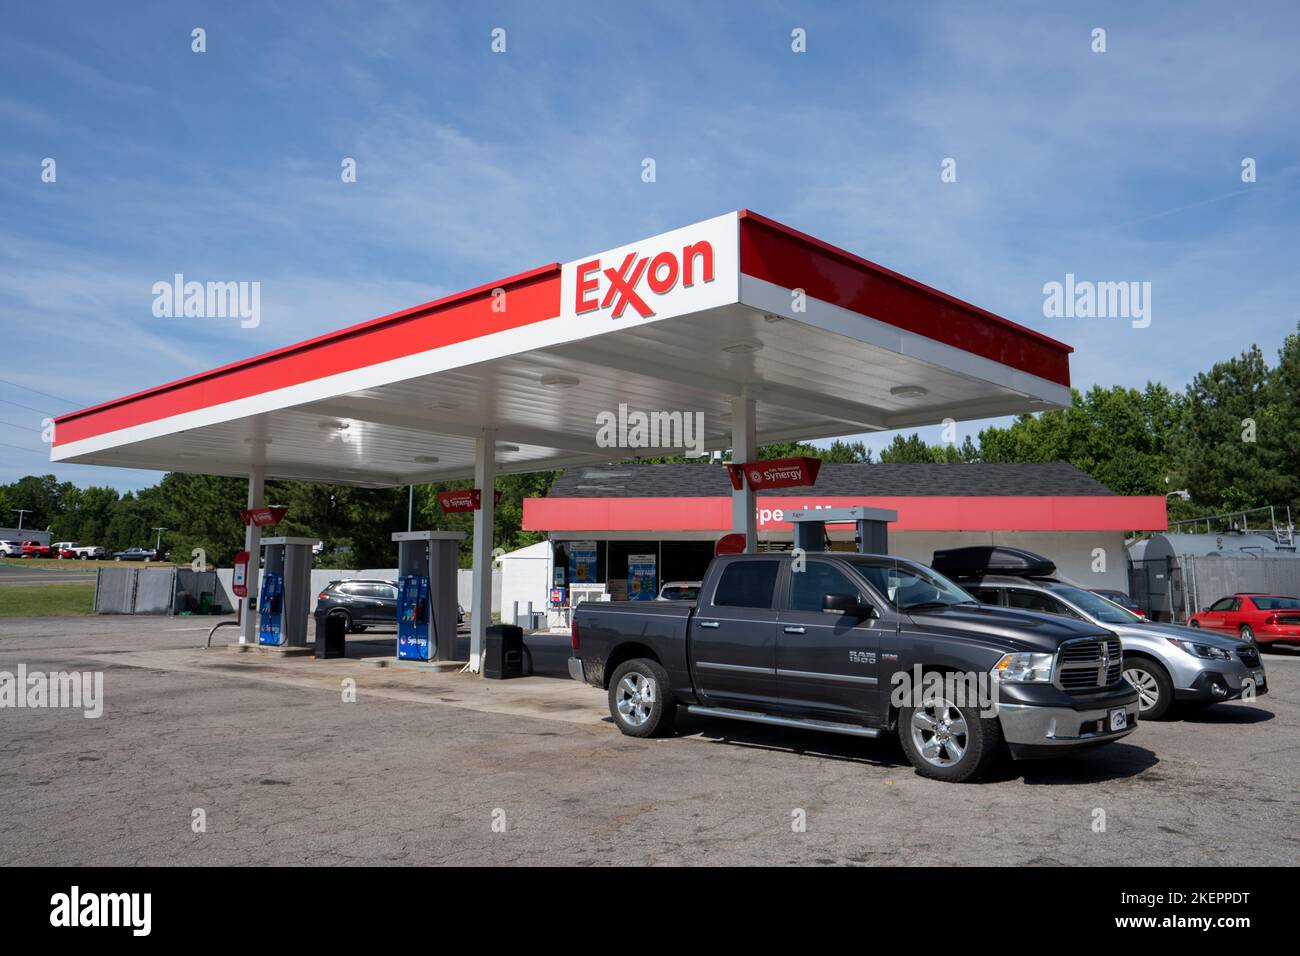 Exterior view of an Exxon gas station in Oxford, North Carolina, seen on Sunday, June 19, 2022. Stock Photo